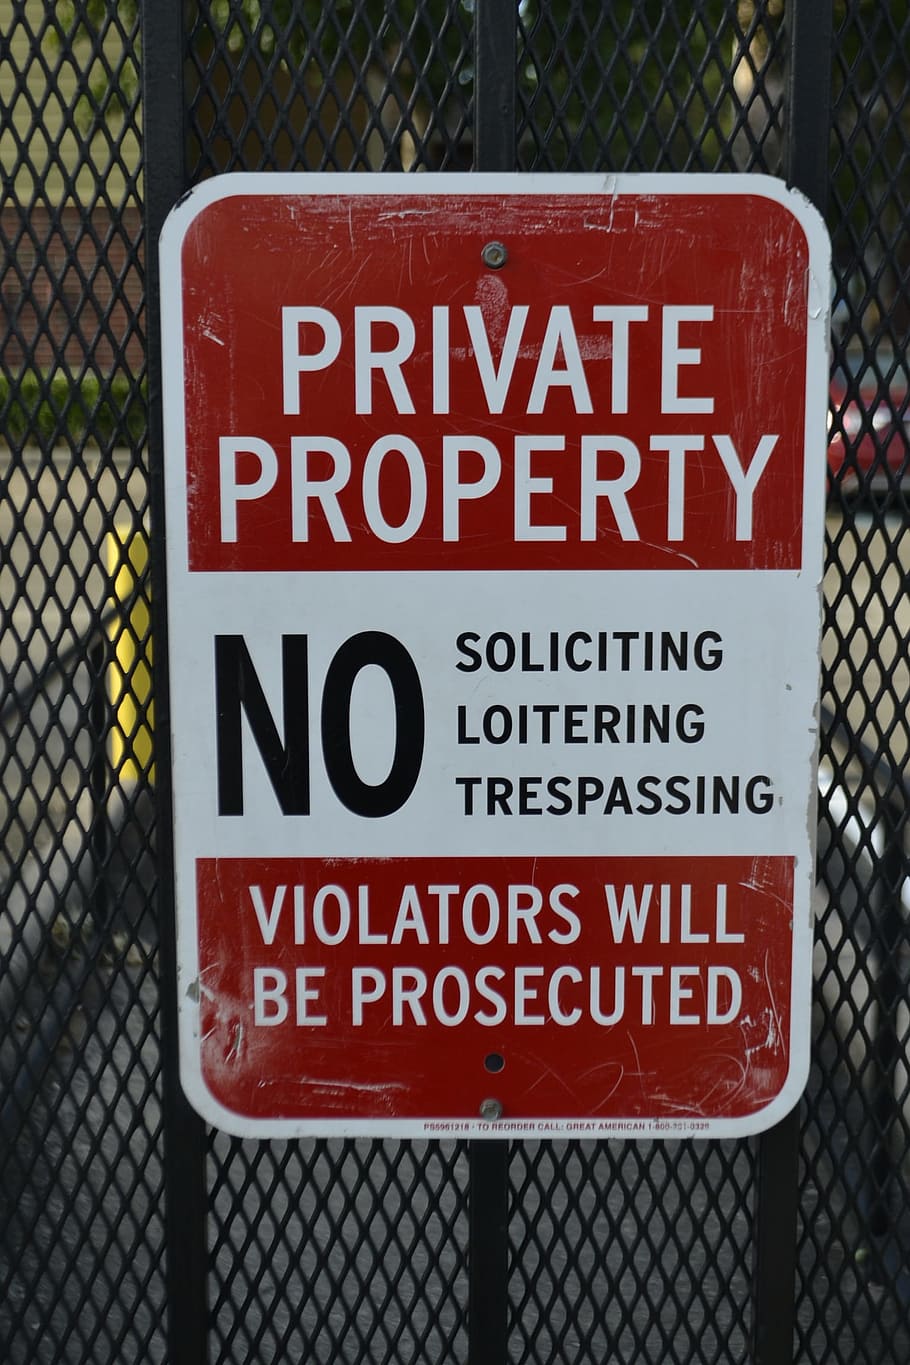 brown and white private property signage on black metal fence